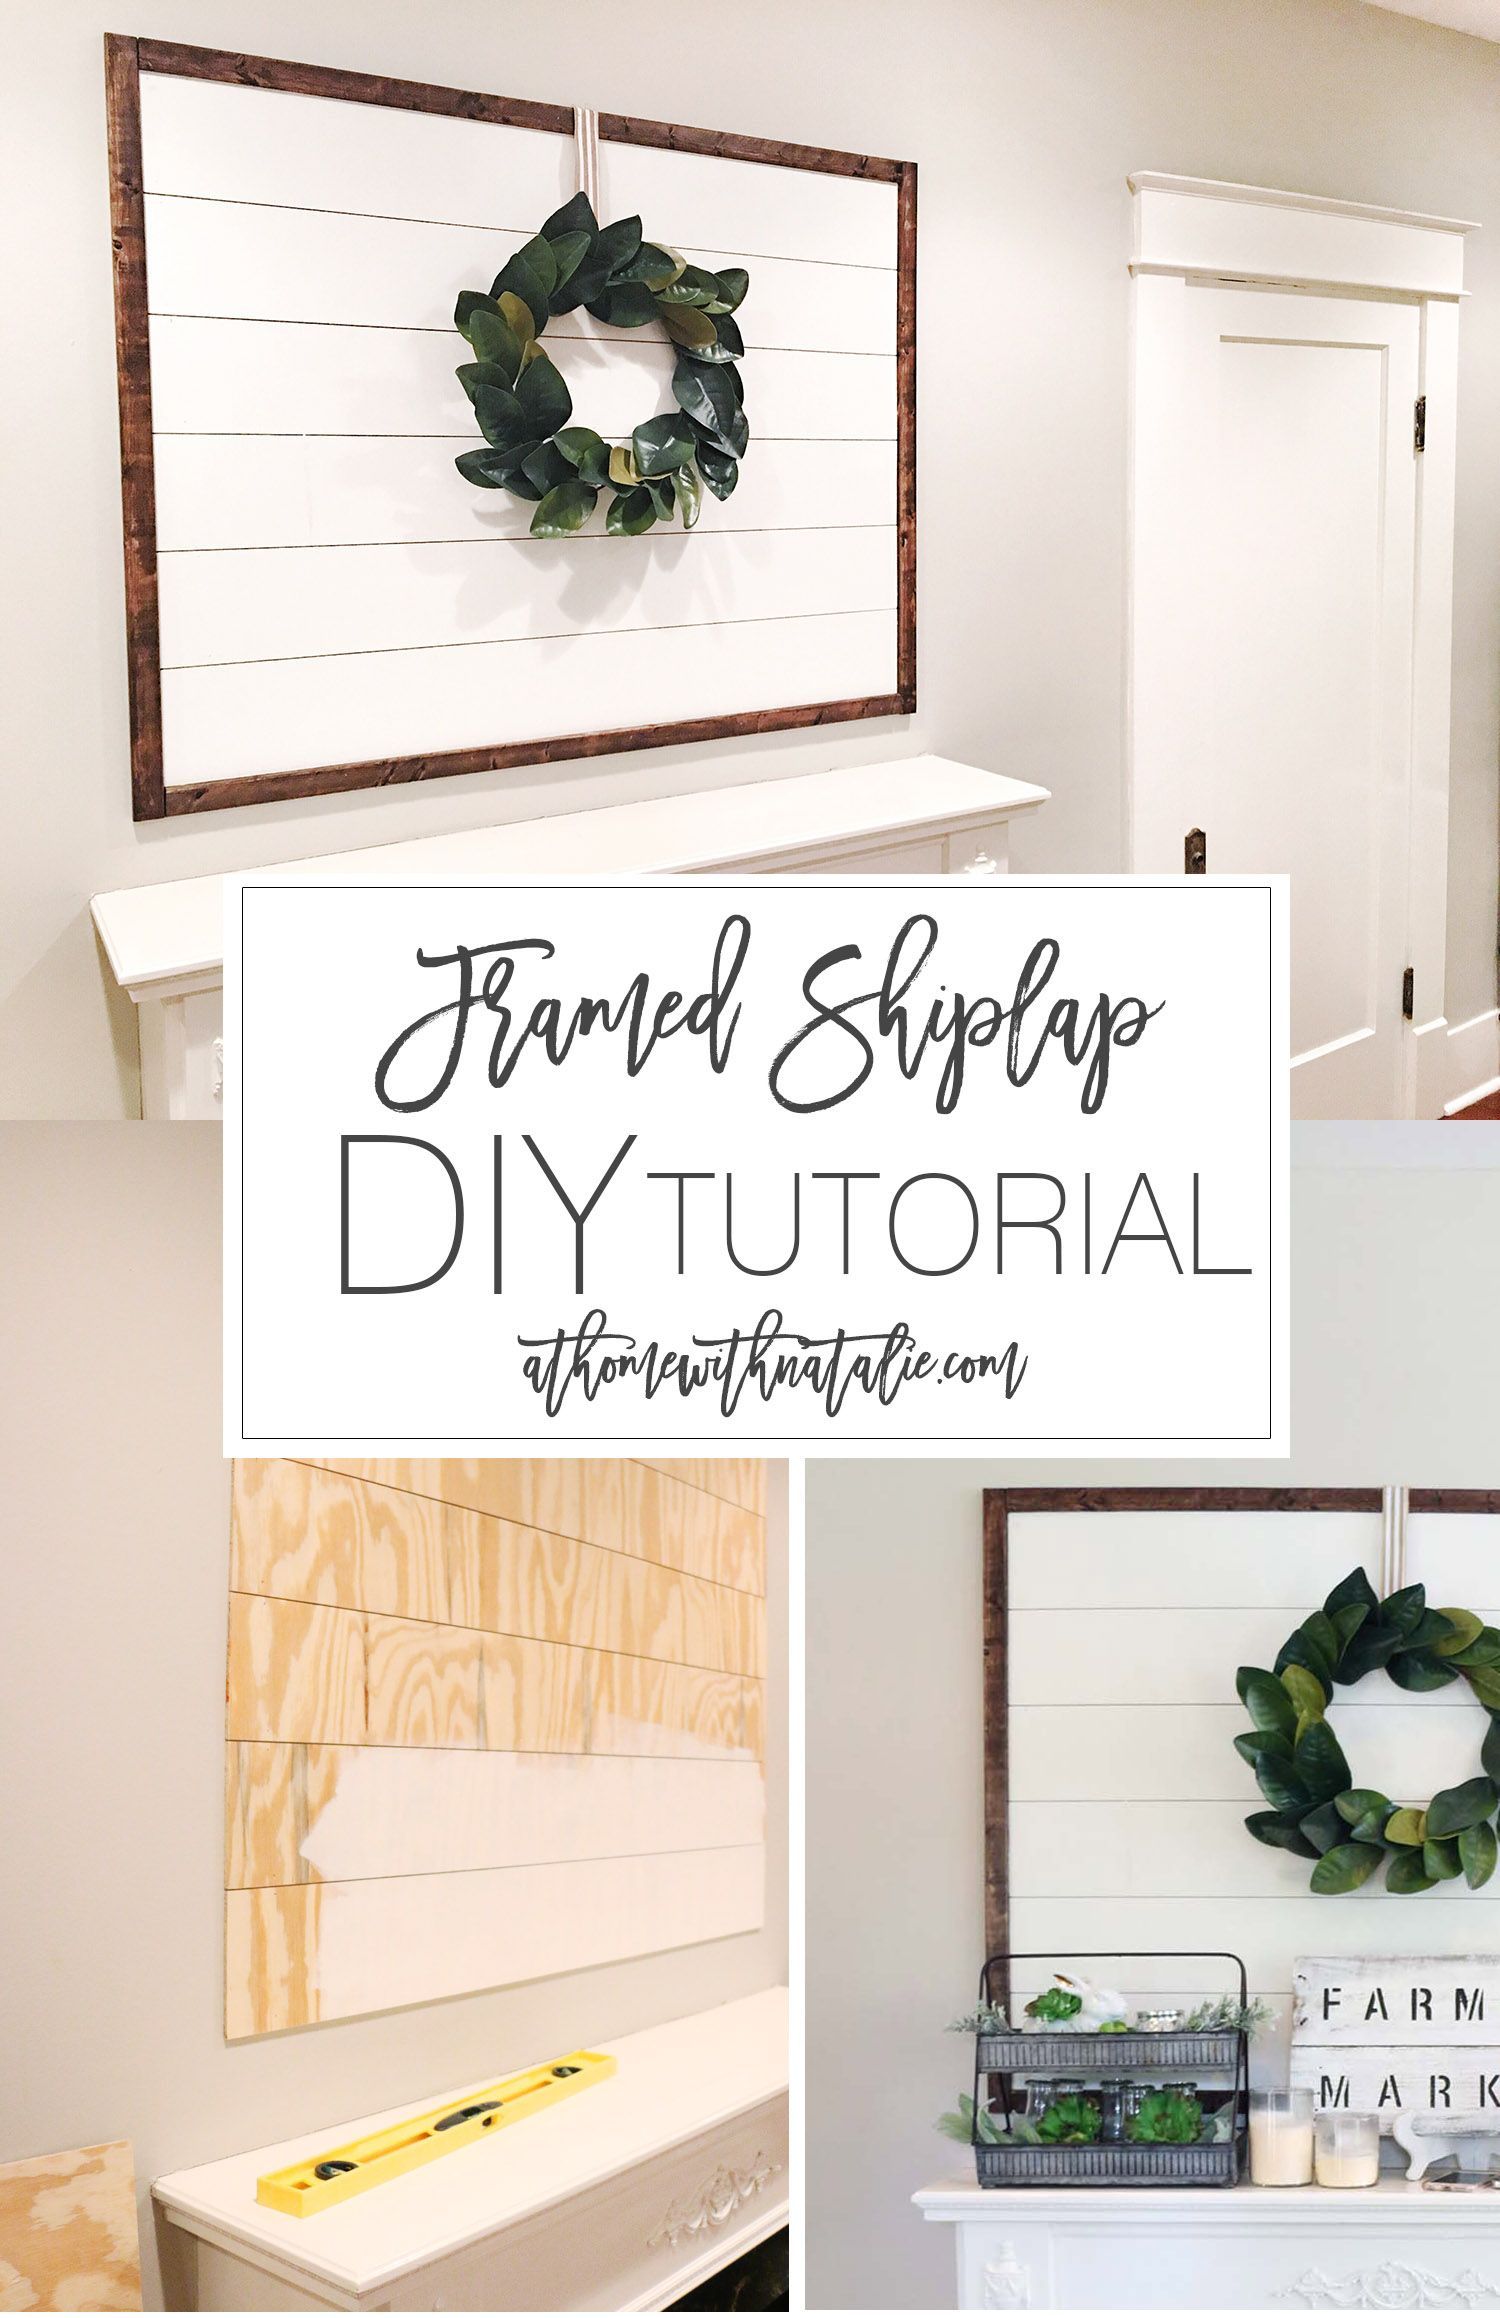 19 diy projects to try home decor wall art ideas